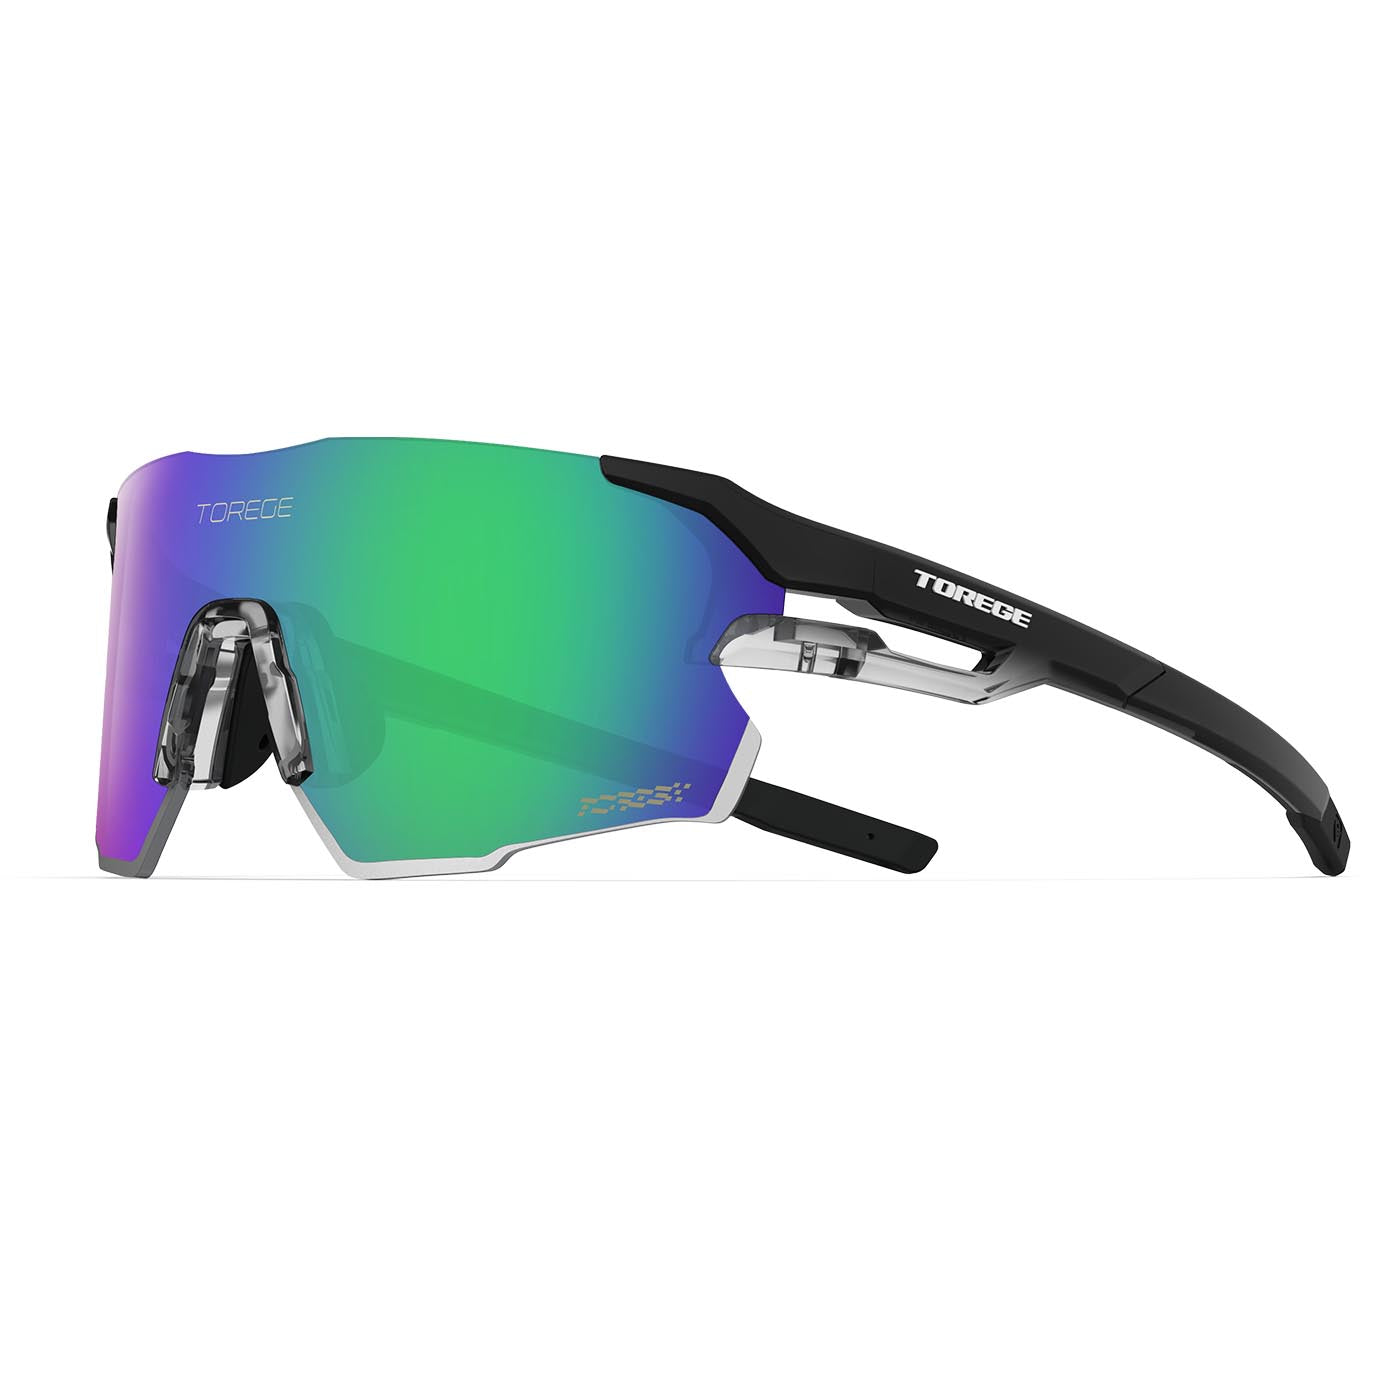 Torege 'Ethereal' Ultra Lightweight Sports Sunglasses for Men & Women with Lifetime Warranty - Ideal for Cycling, Hiking, Fishing, Golf & Running